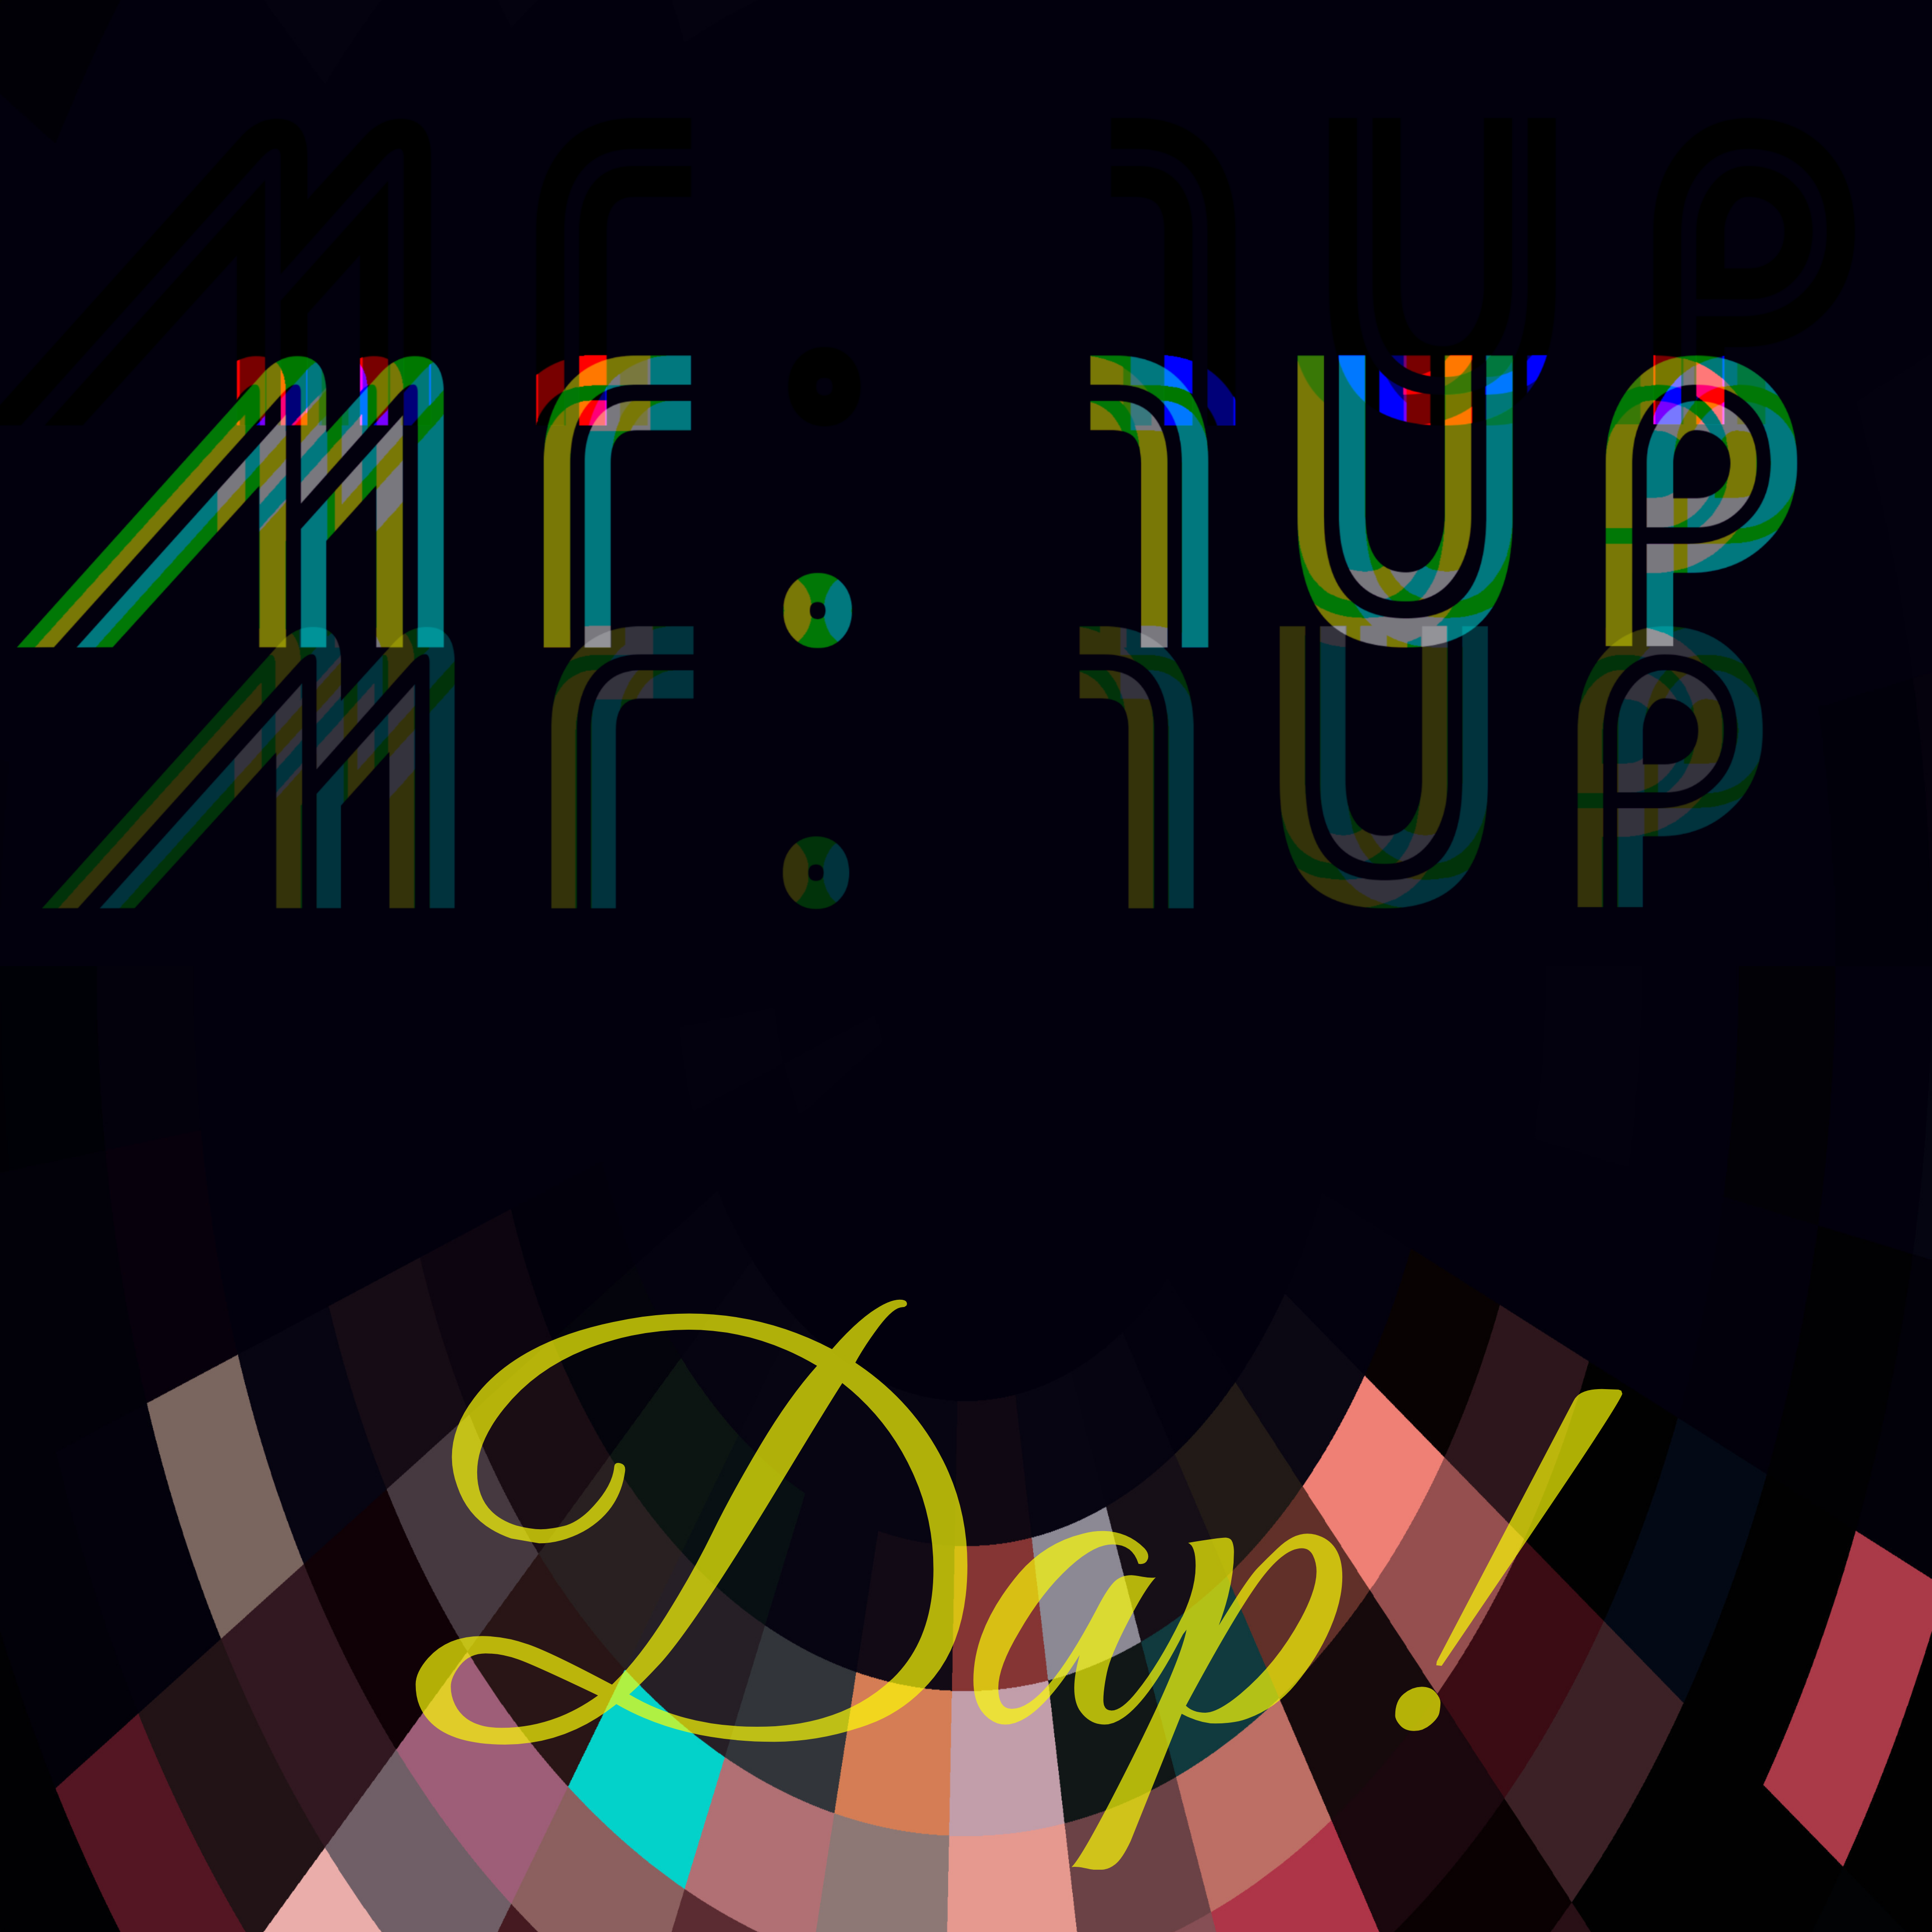 Boasting an infectious beat and Groovy EDM vibe, Mr. 1up Drops “Dap!”